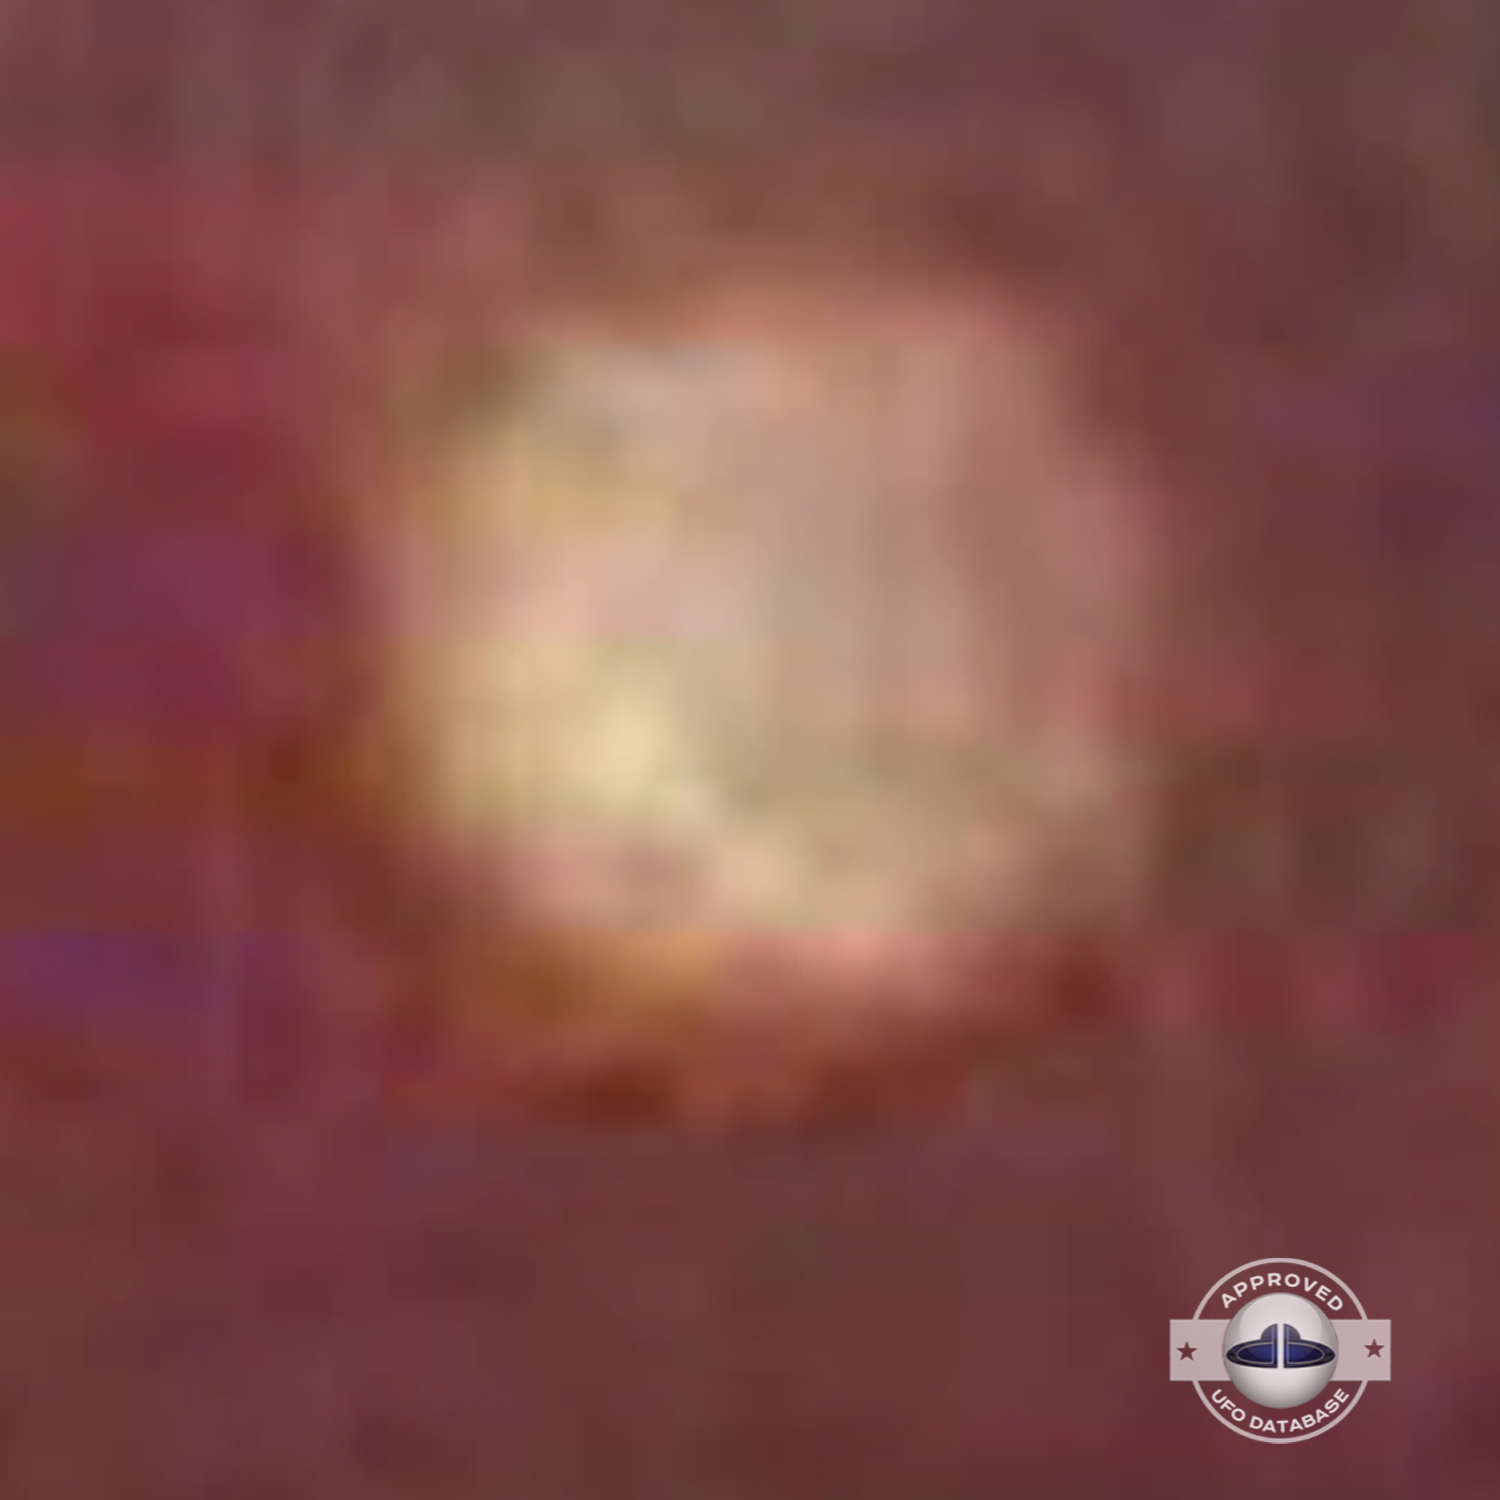 UFO picture shot on dusk at Waroona in the Peel region of Australia UFO Picture #145-6